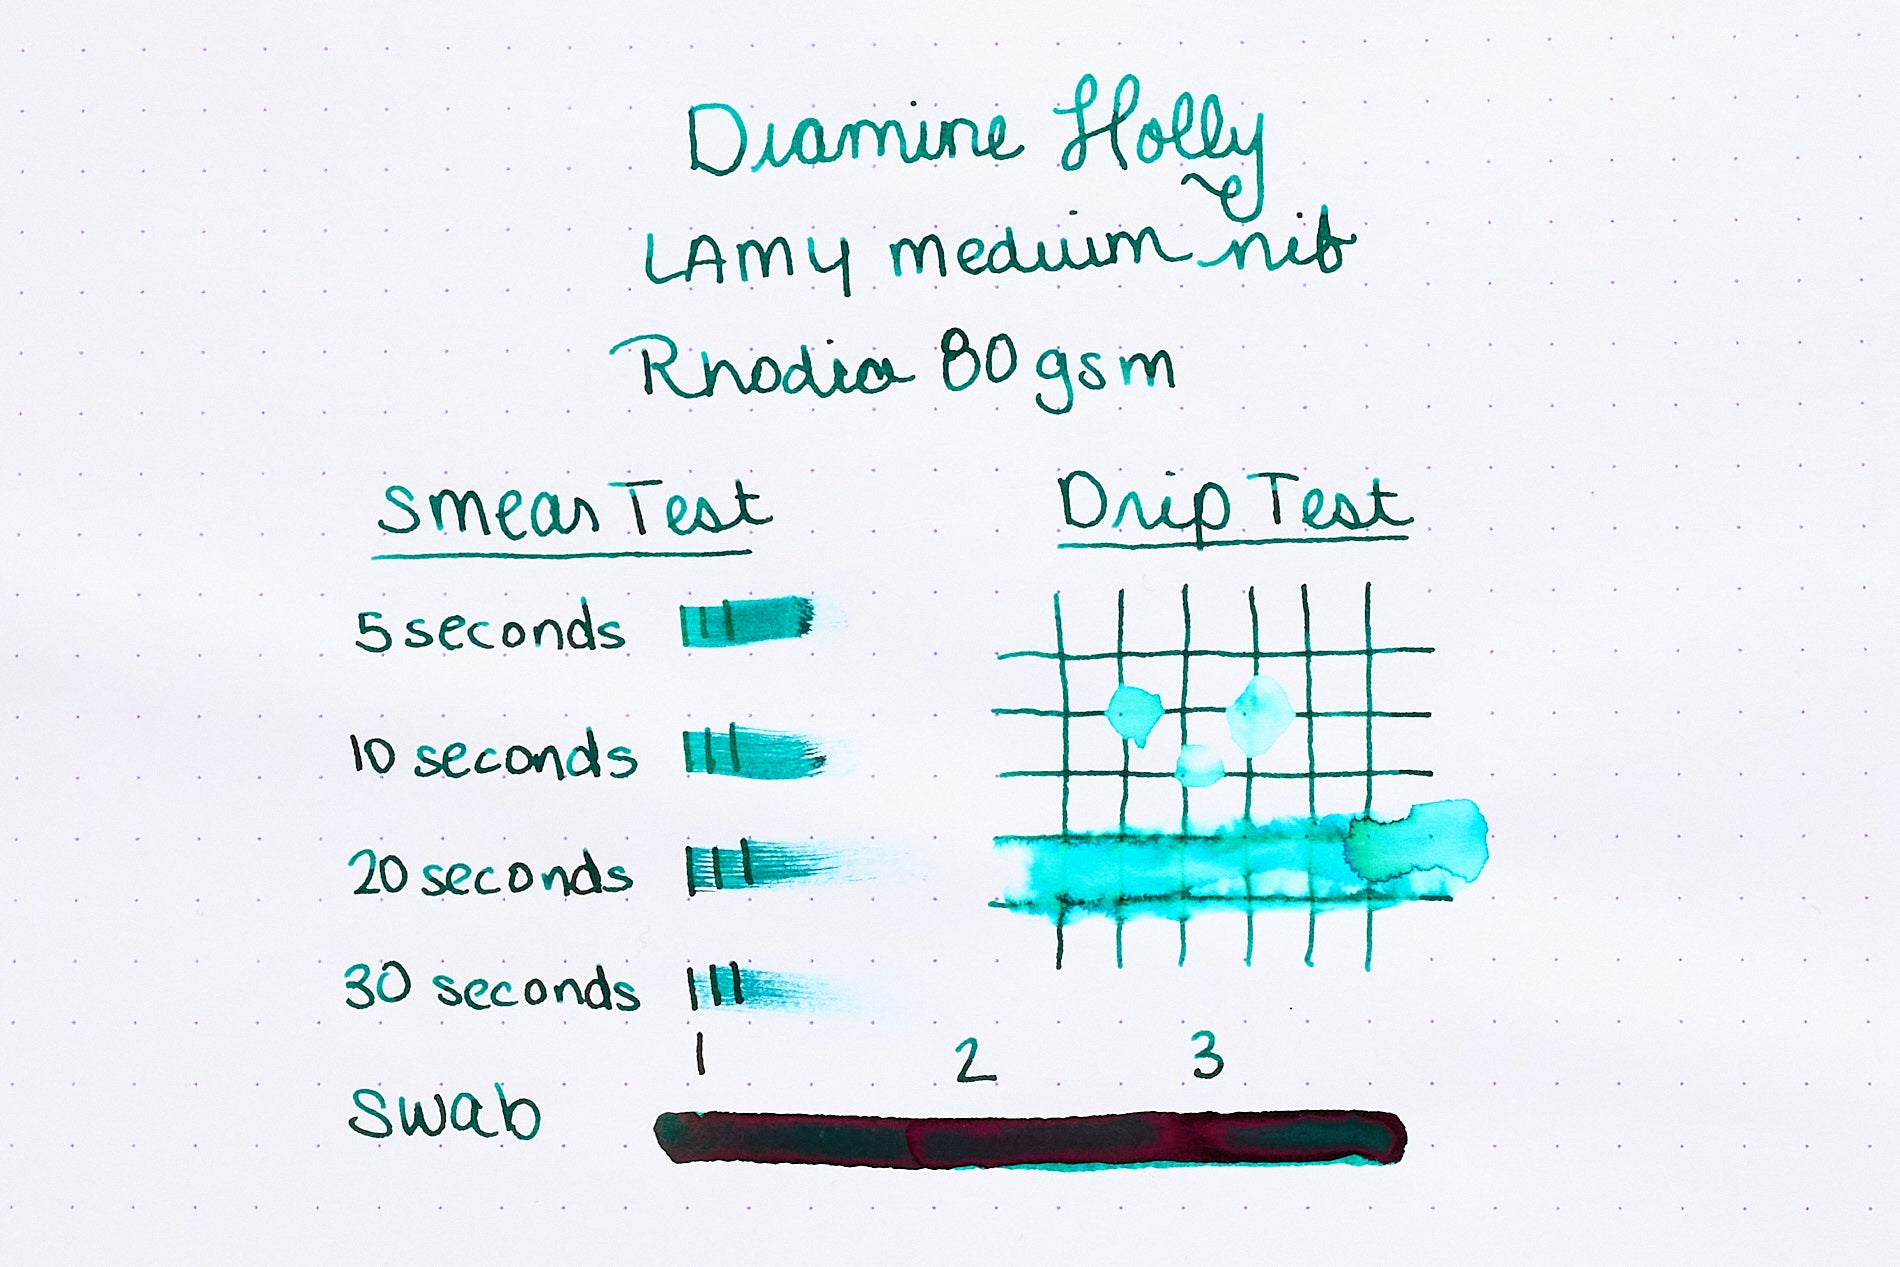 Diamine Holly Fountain Pen Ink writing sample on white dot grid paper